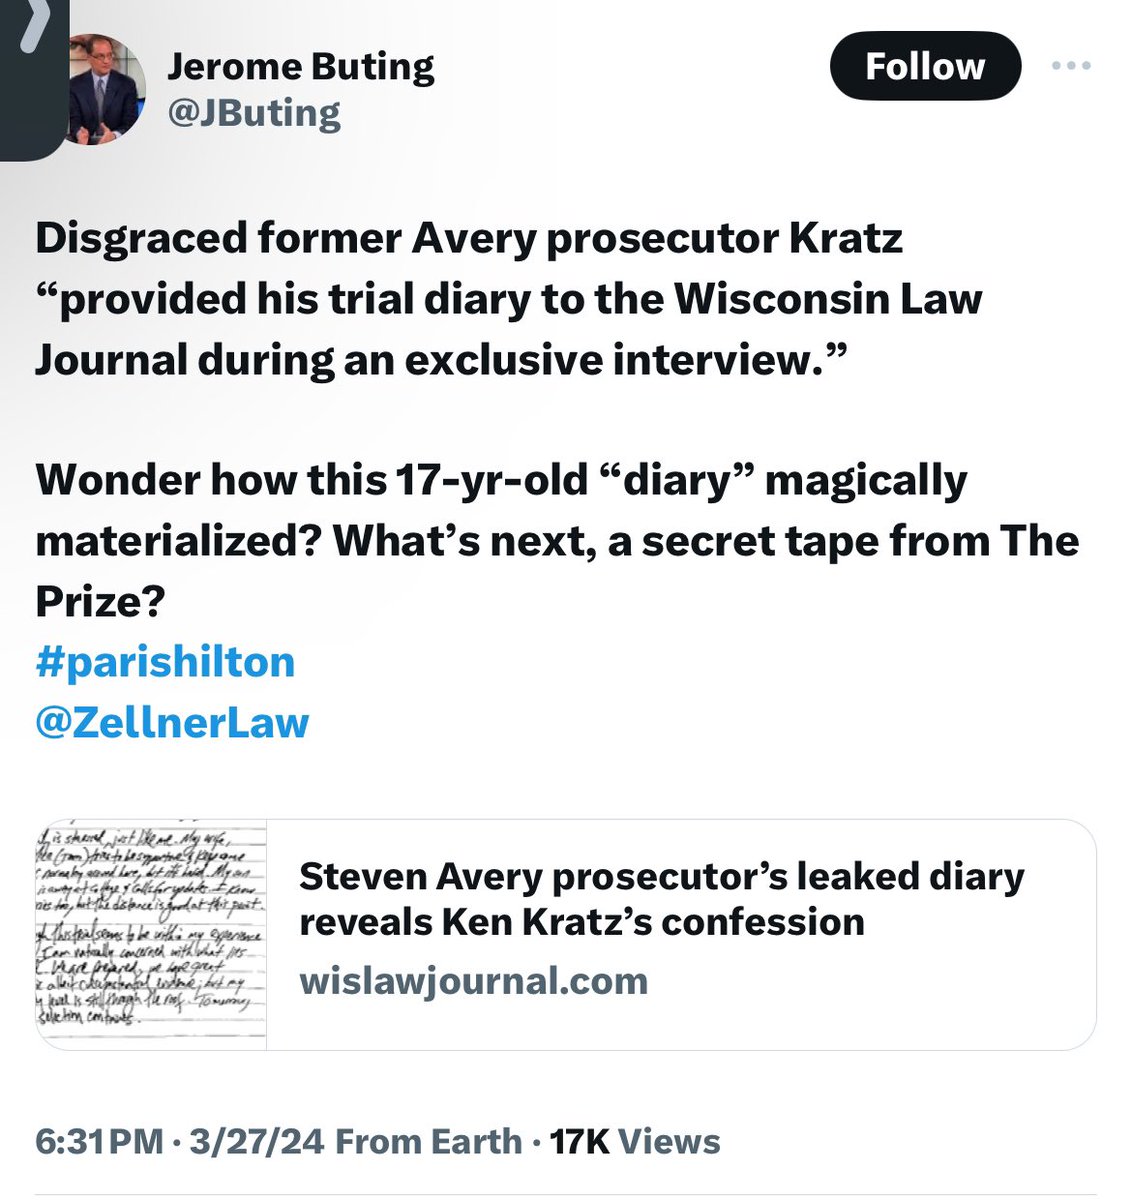 Wow Jerry! It’s all a giant conspiracy! Get out your tinfoil hat- disgraceful lawyer Jerry Buting needs to keep pointing fingers at anyone but his killer client Steven Avery. #InnocenceFraud #TrueCrime #MakingAMurderer #MakingMoneyFromAMurderer #LawyersGrifting